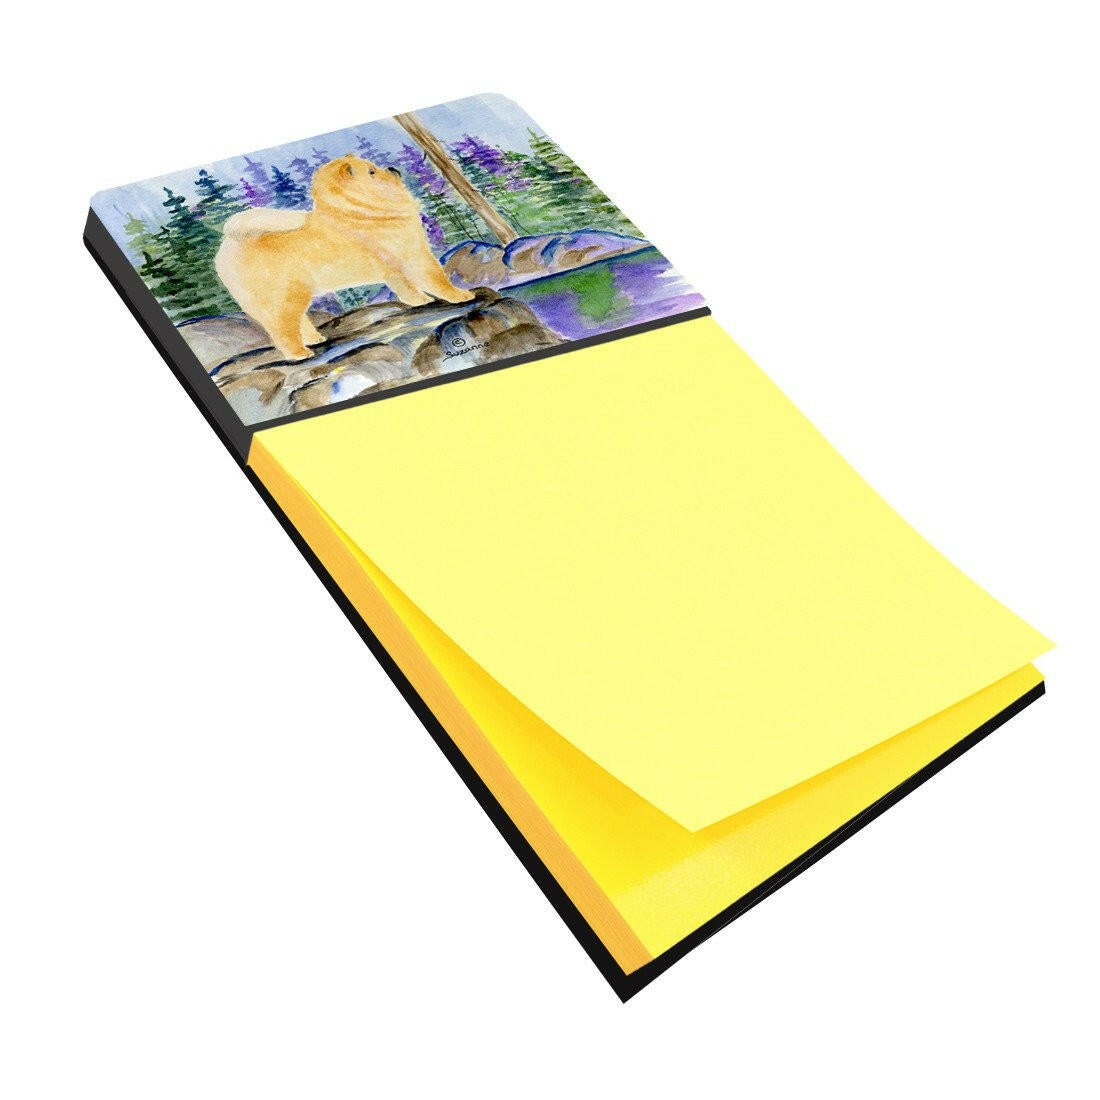 Chow Chow Refiillable Sticky Note Holder or Postit Note Dispenser SS8003SN by Caroline's Treasures